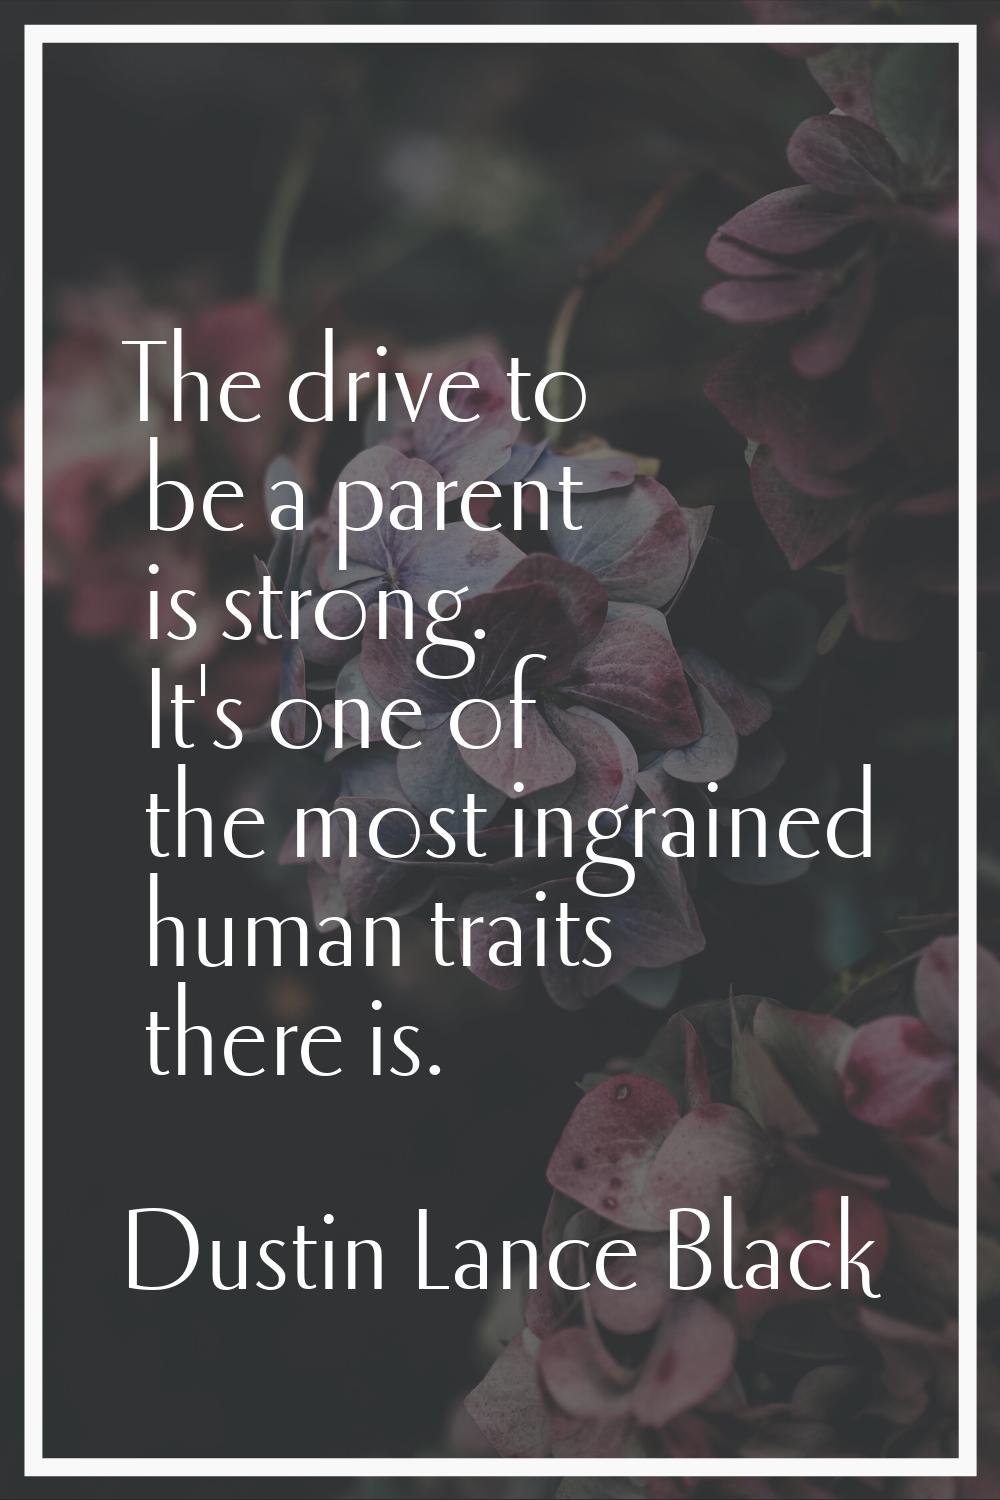 The drive to be a parent is strong. It's one of the most ingrained human traits there is.